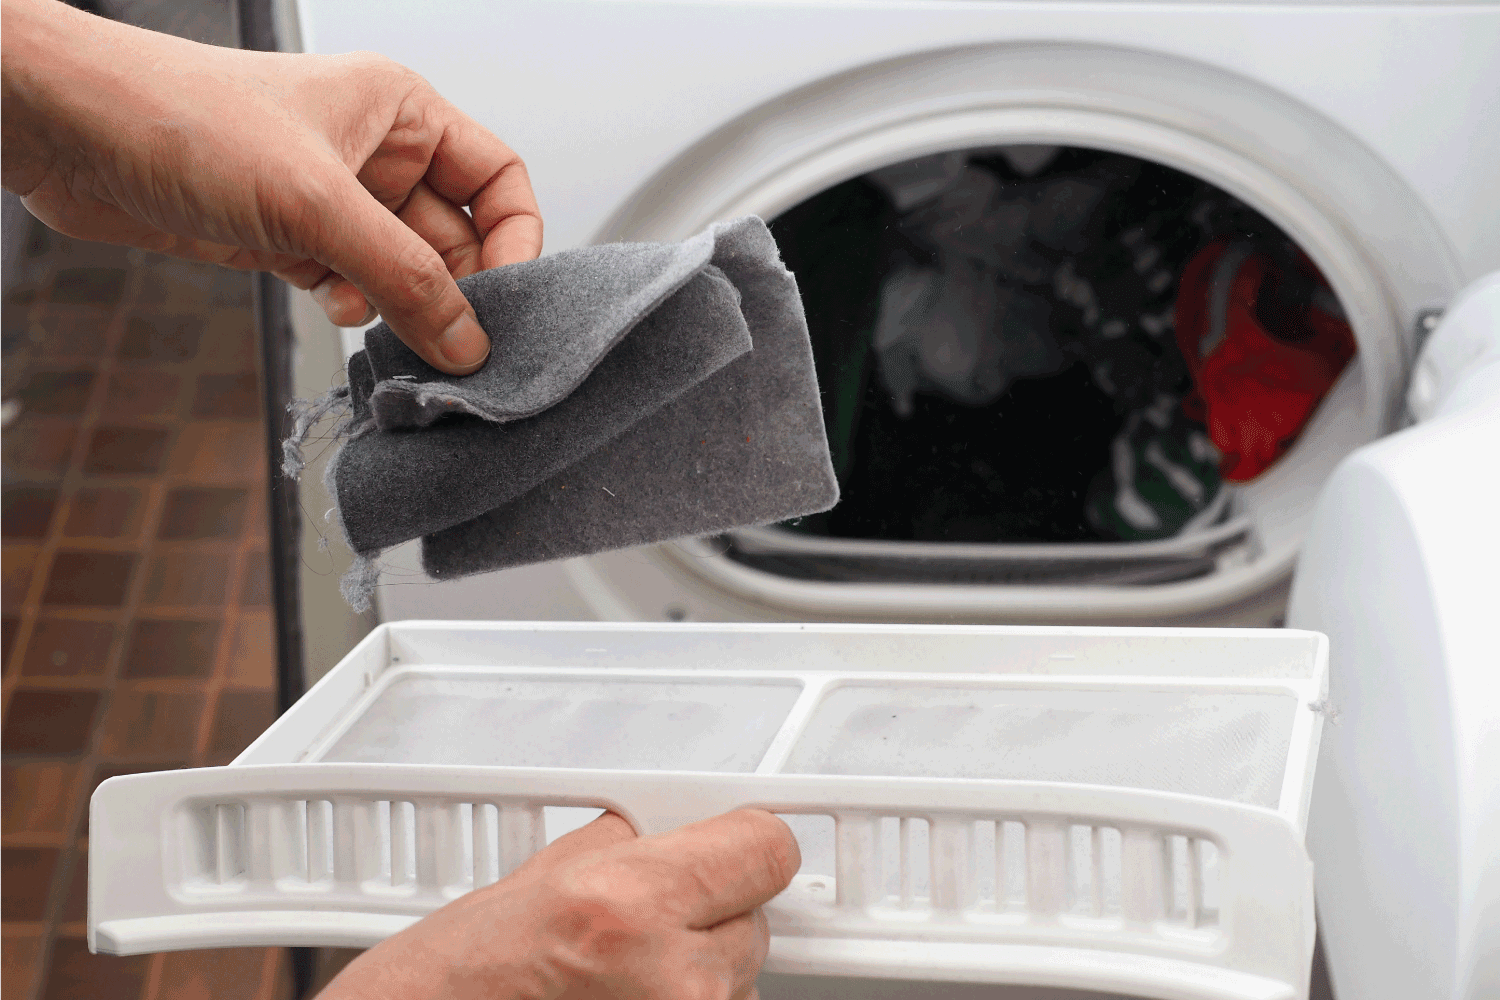 hand removing lint from fluff filter of the tumble dryer on blurred background of clothes dryer with washed clothing